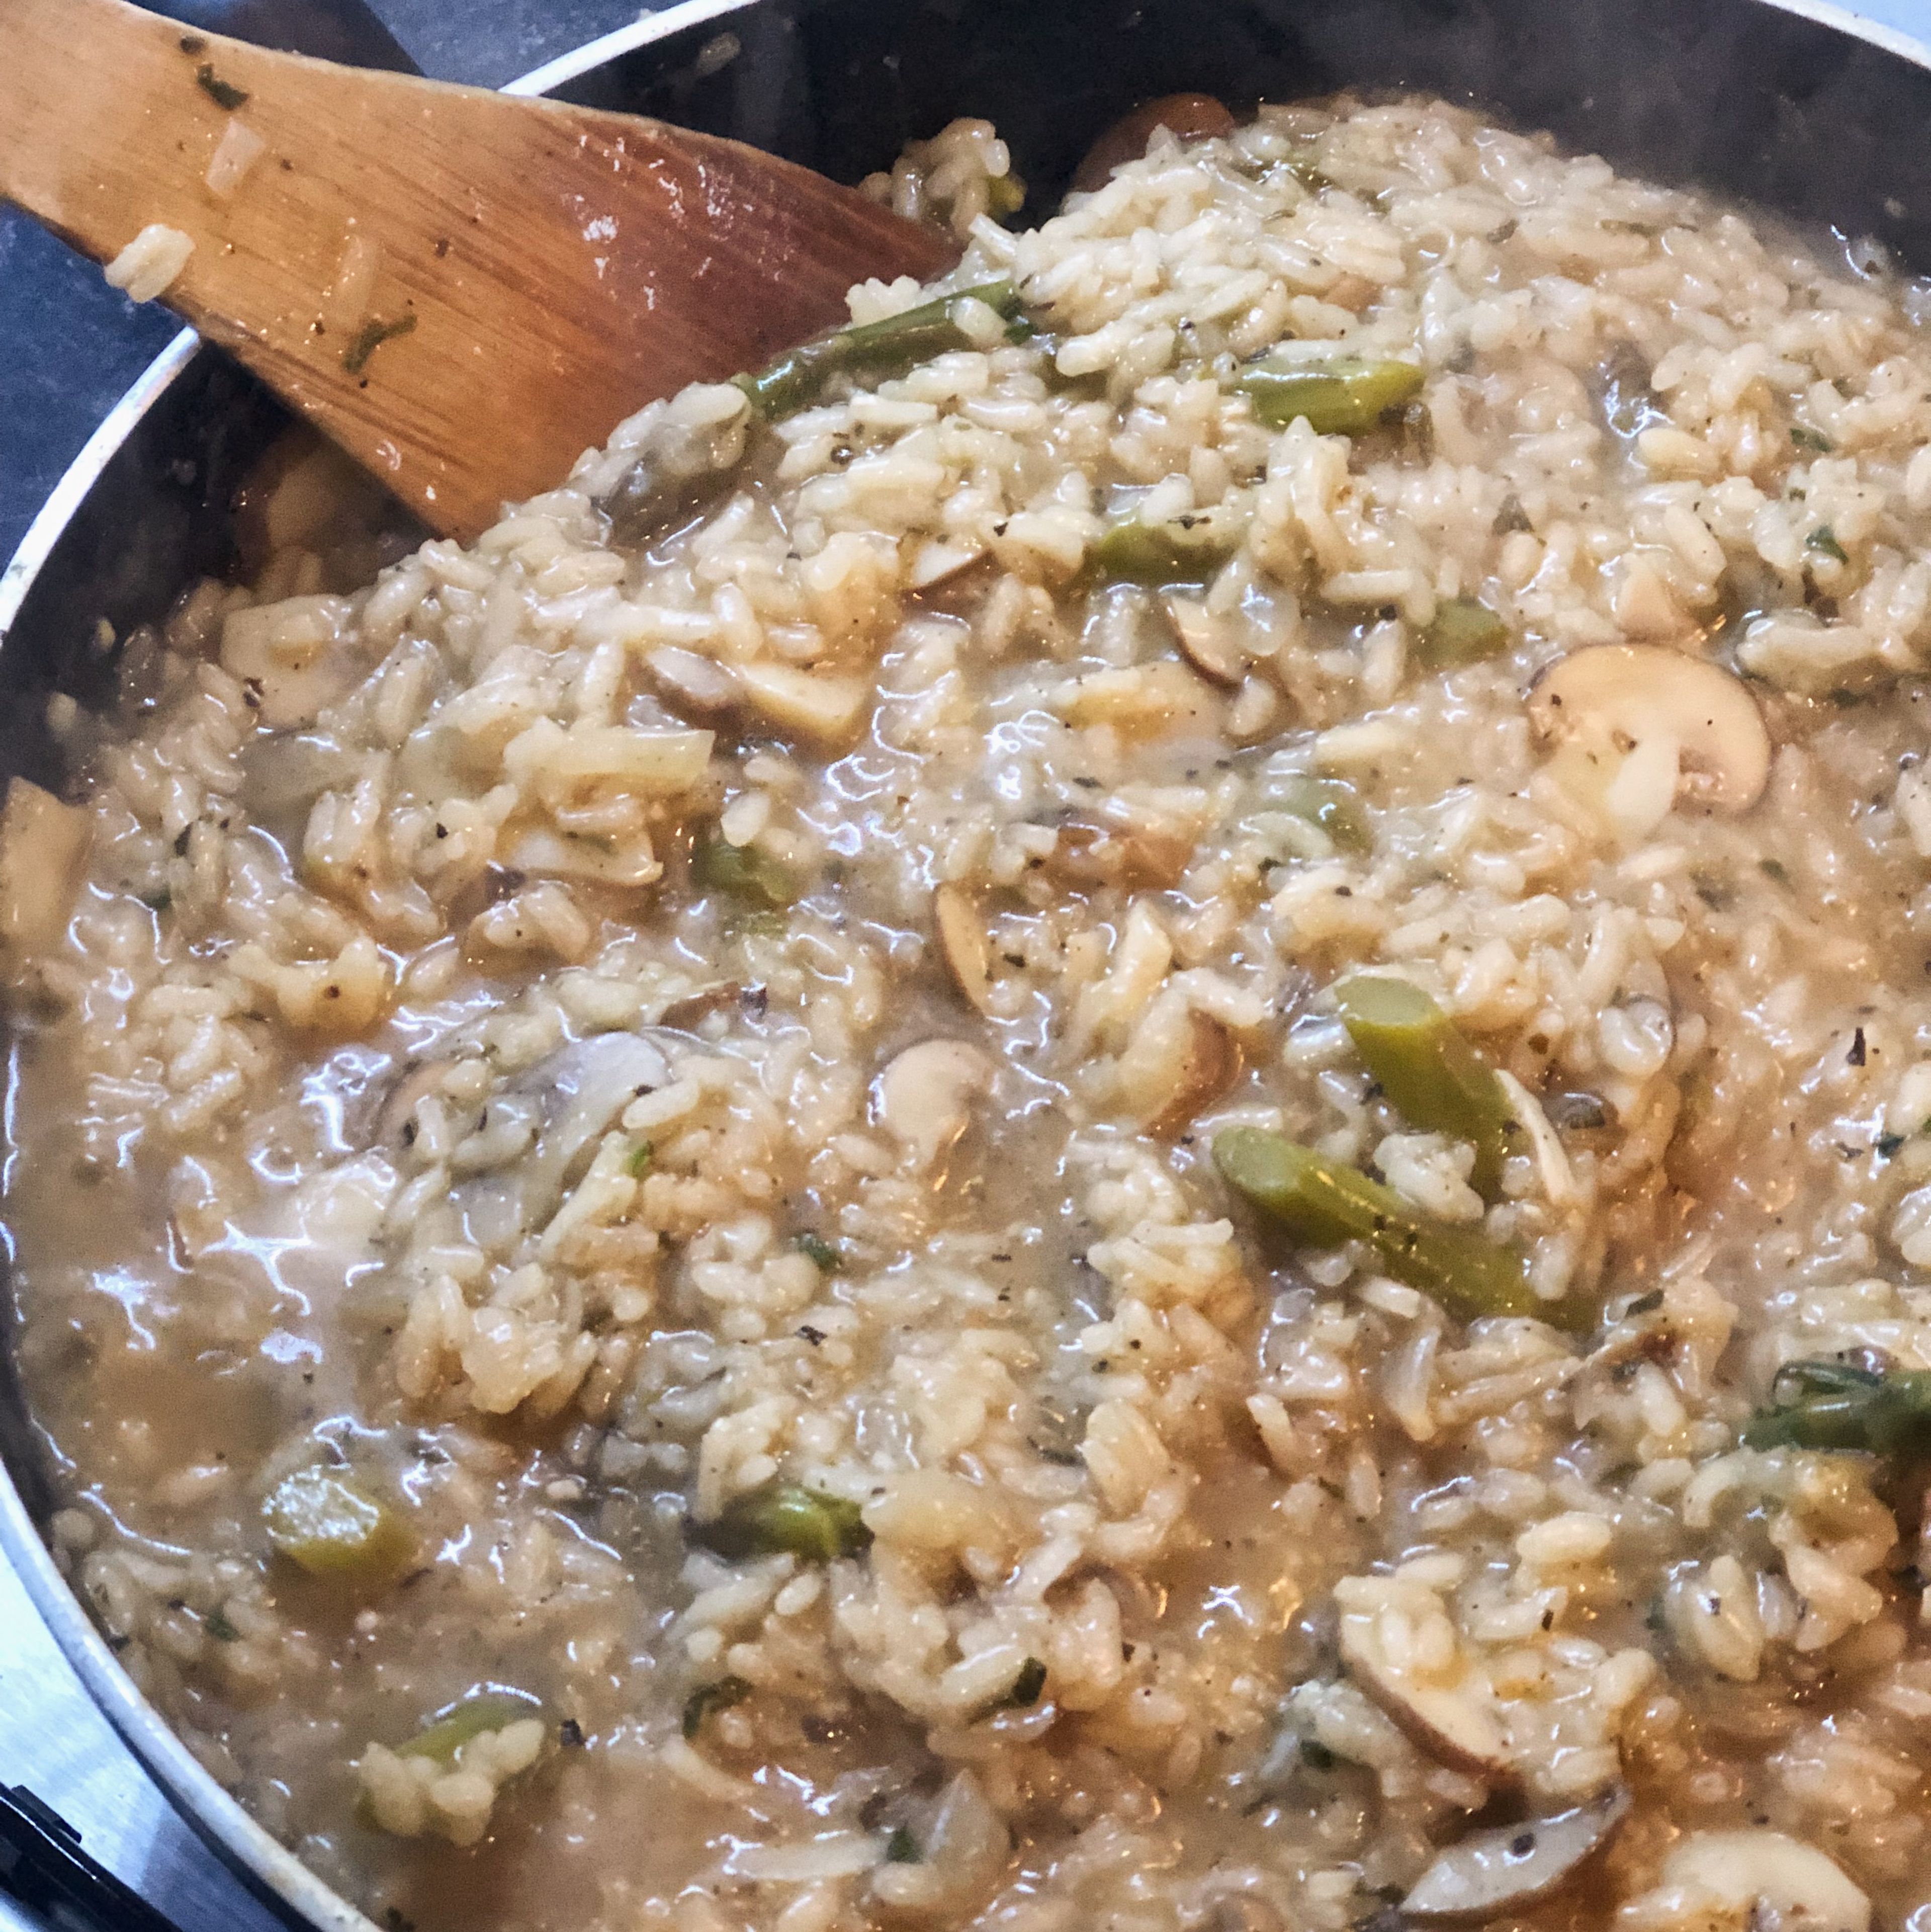 Add sage to the wok. Now add stock bit by bit for 25 minutes or until rice is soft and creamy . Let the rice absorb the stock before adding more.